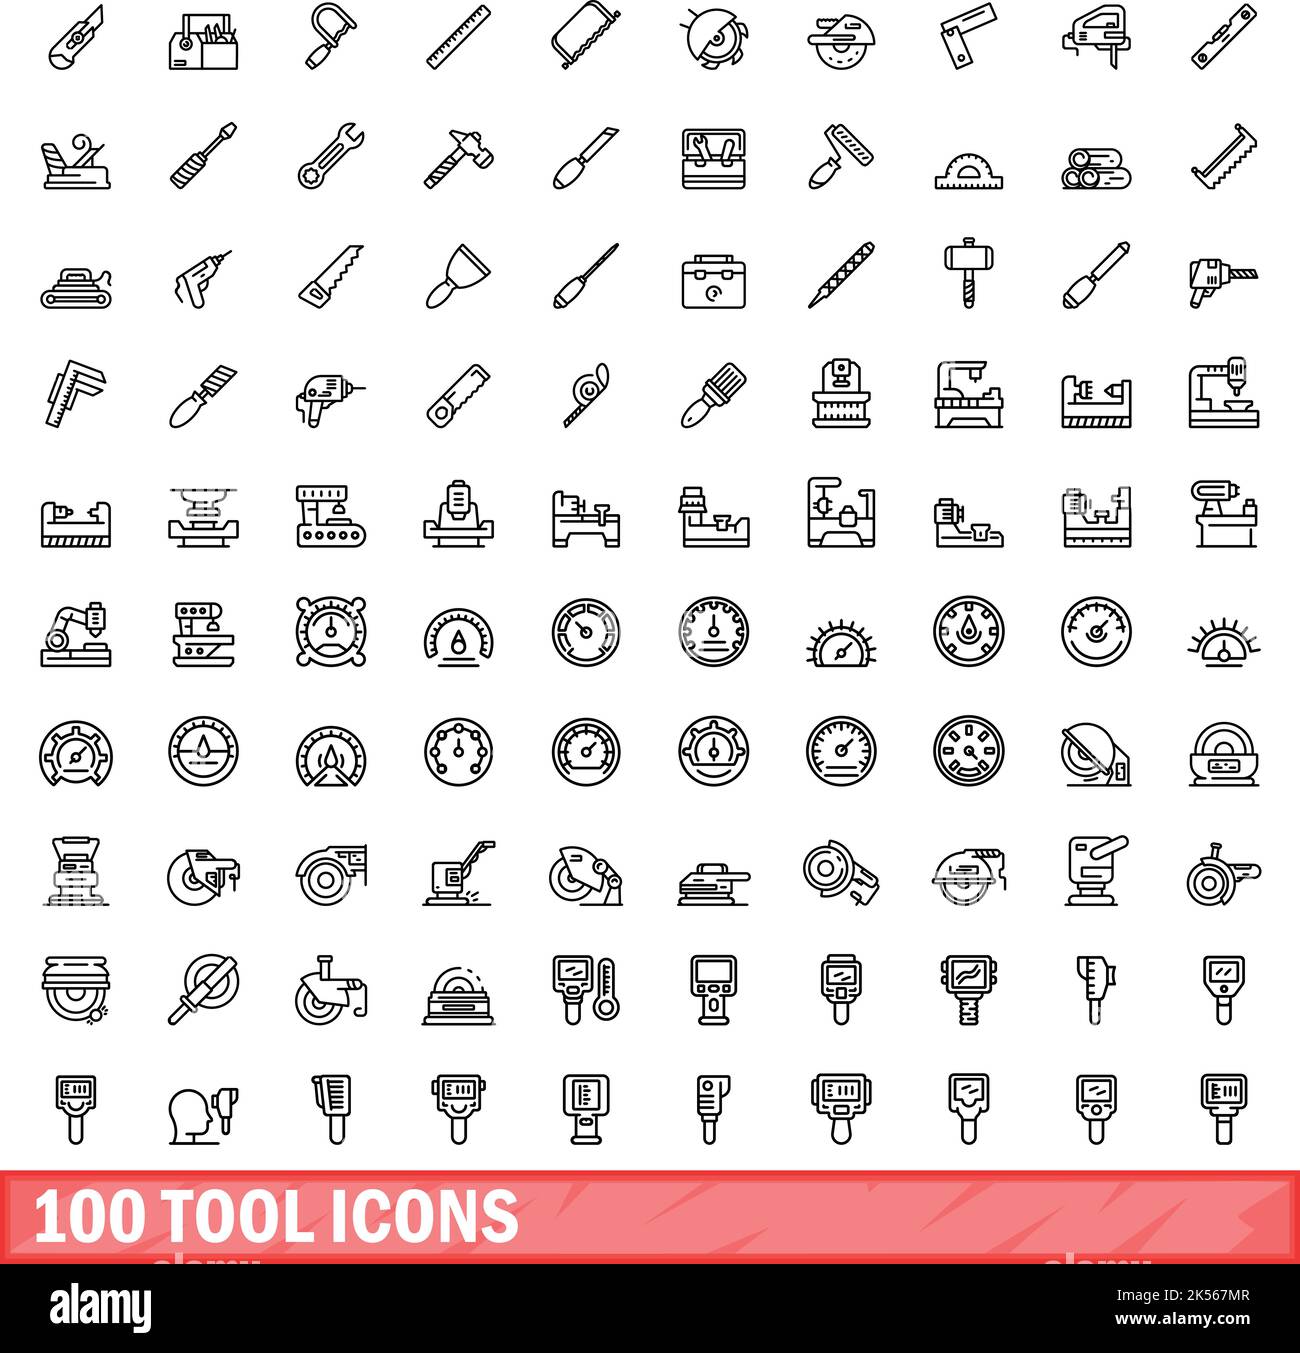 100 tool icons set. Outline illustration of 100 tool icons vector set isolated on white background Stock Vector